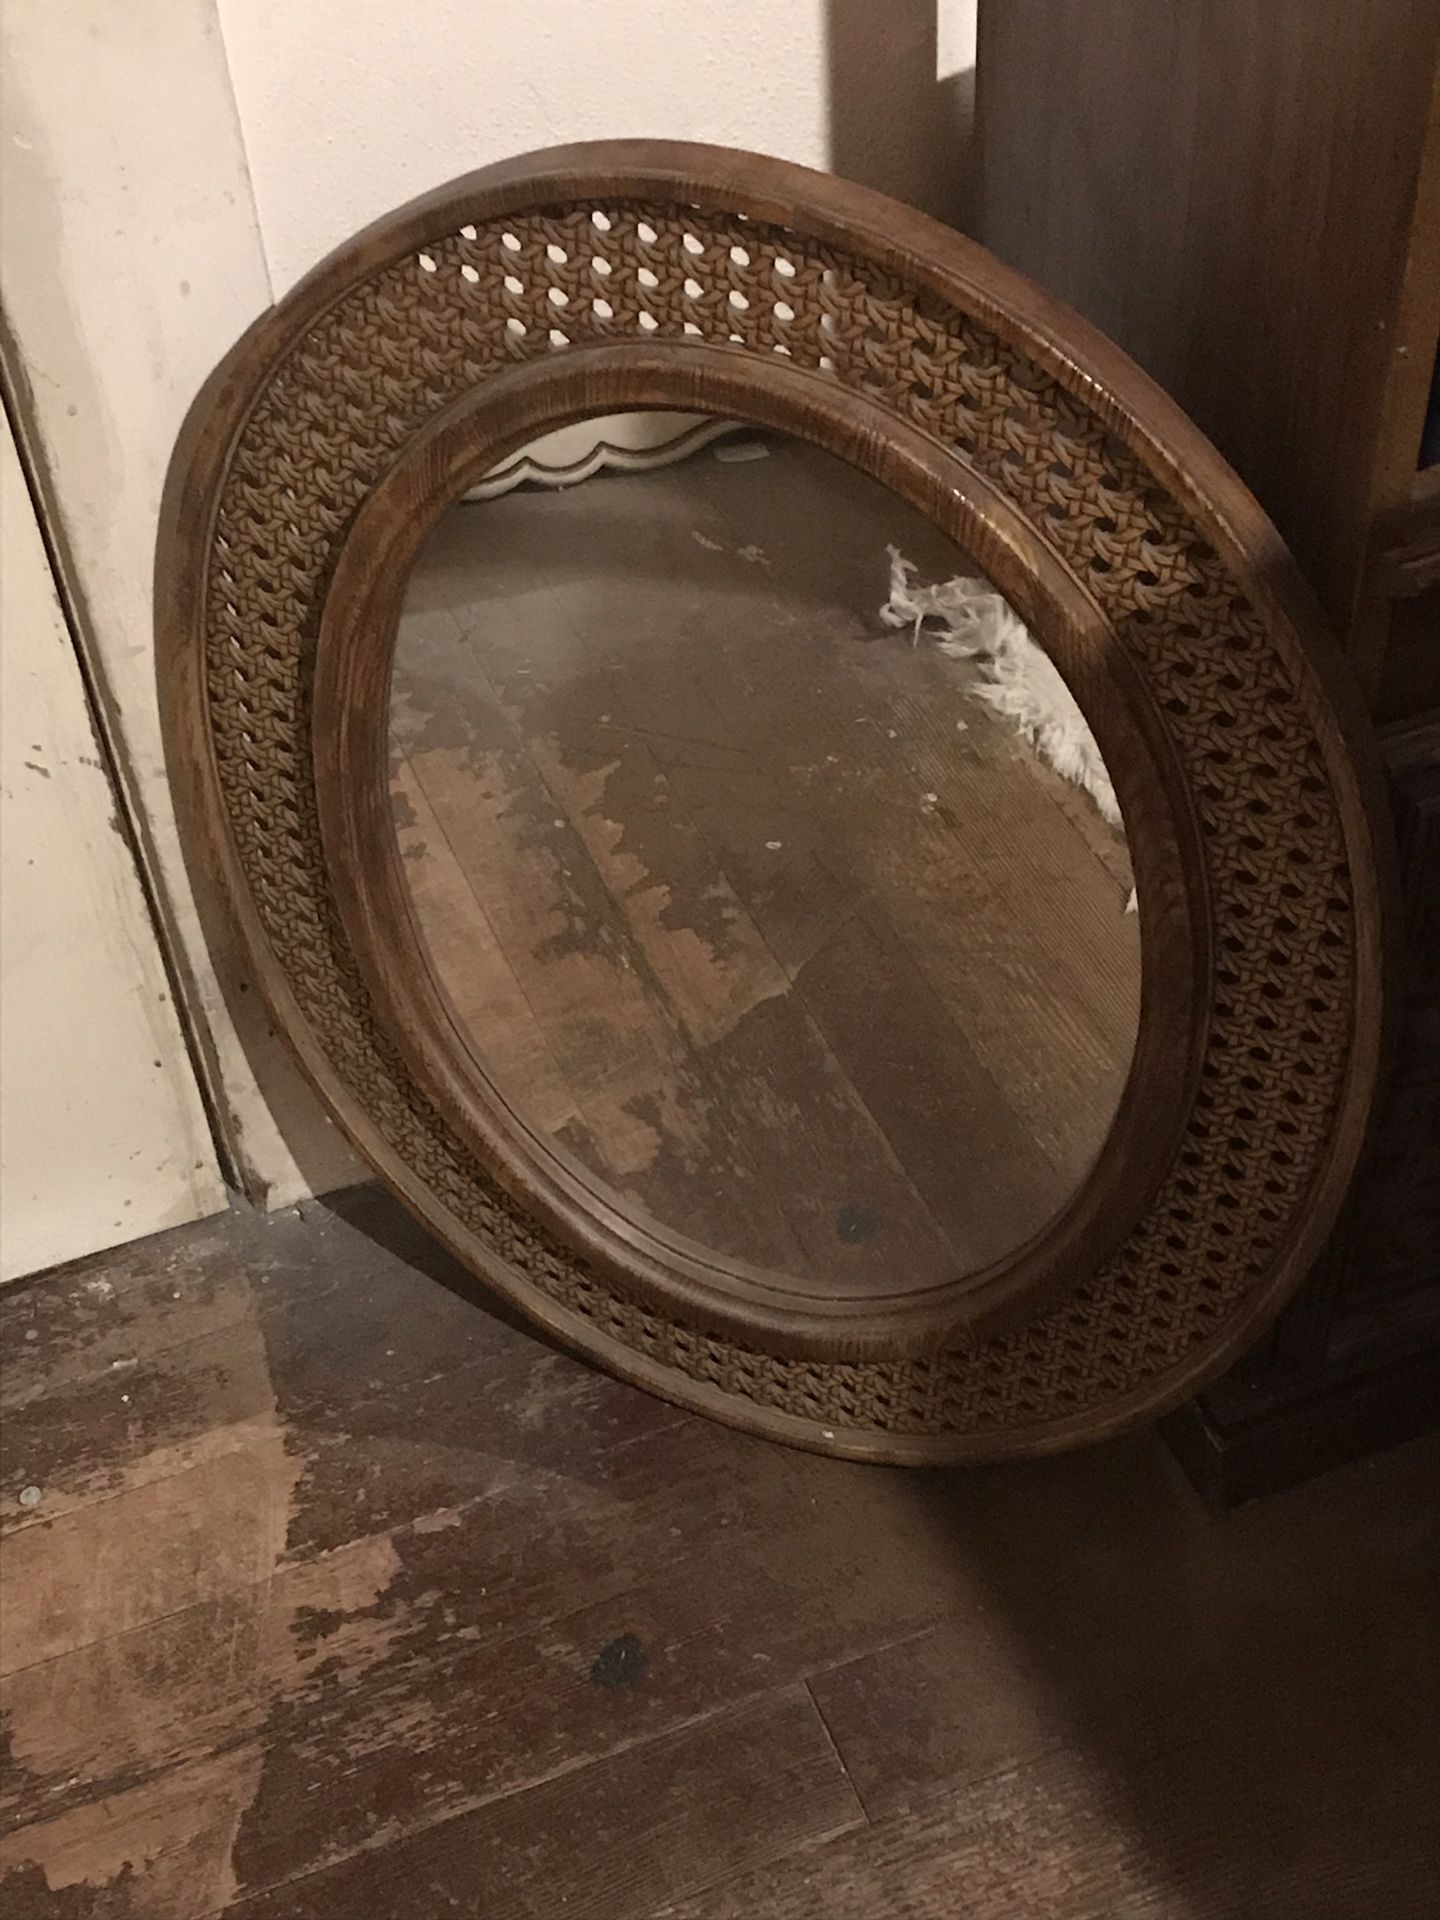 Mirror oval